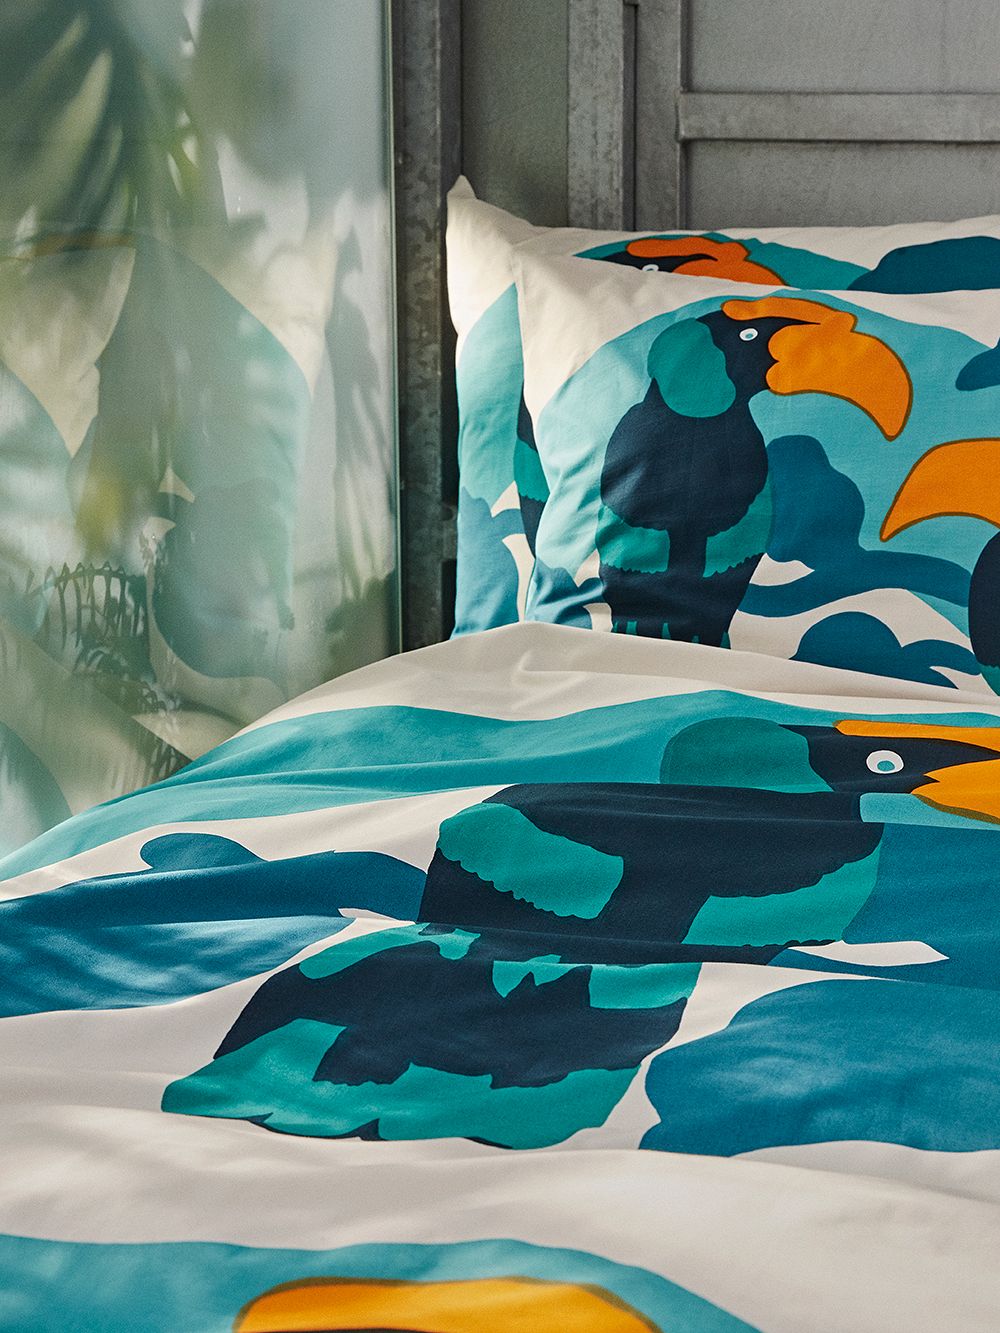 An image of Marimekko's Pepe duvet cover and pillow case on a bed.